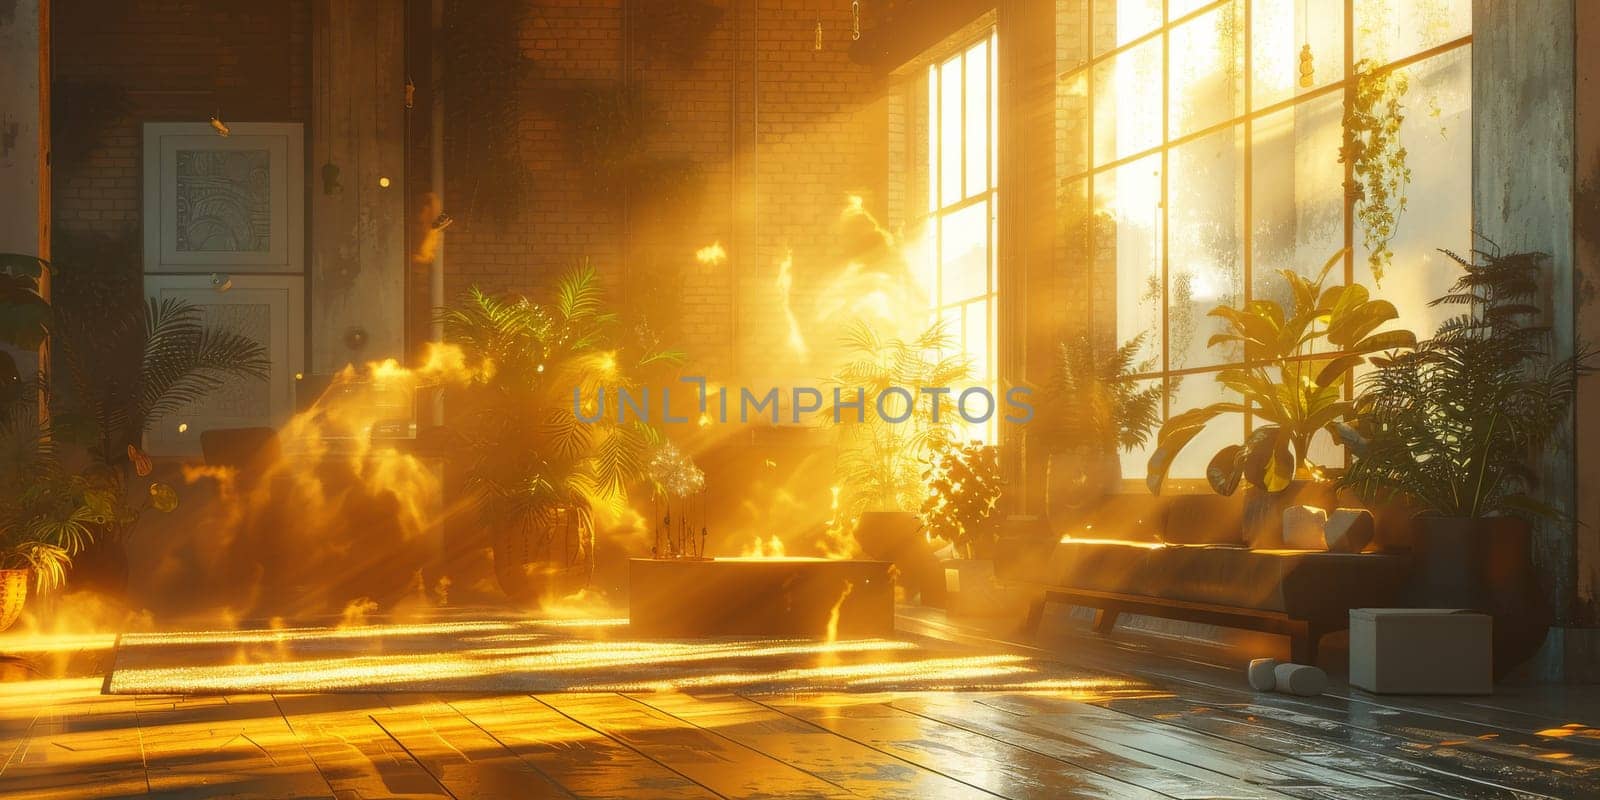 A room with a lot of plants and a fireplace. The room is bright and sunny, with sunlight streaming in through the windows. The plants are well-cared for and add a touch of greenery to the space